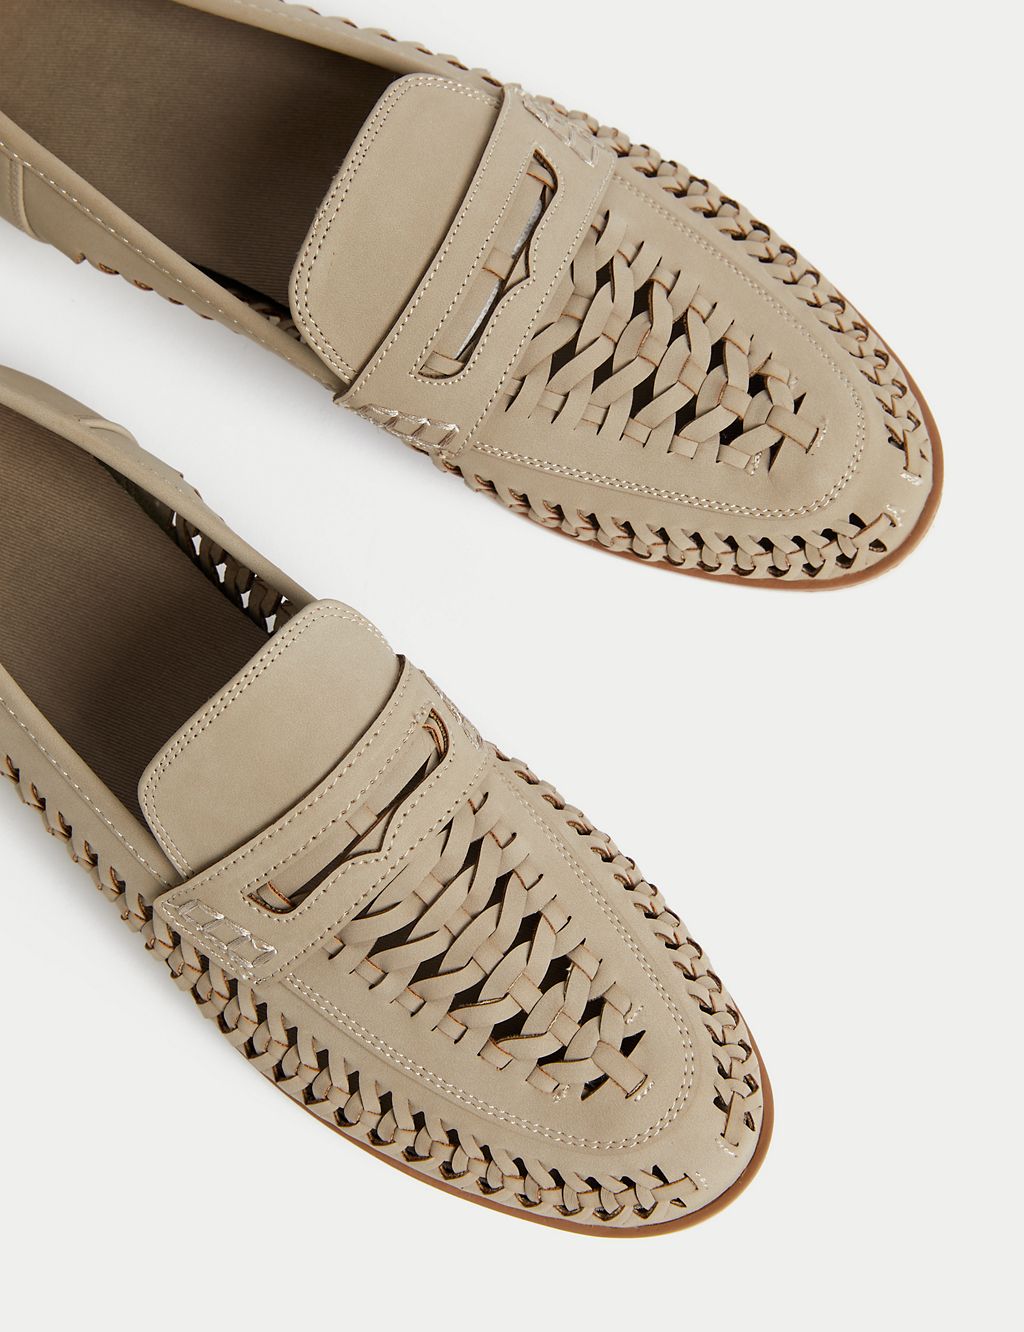 Kids' Woven Slip-On Loafers (3 Large - 7 Large) 2 of 4